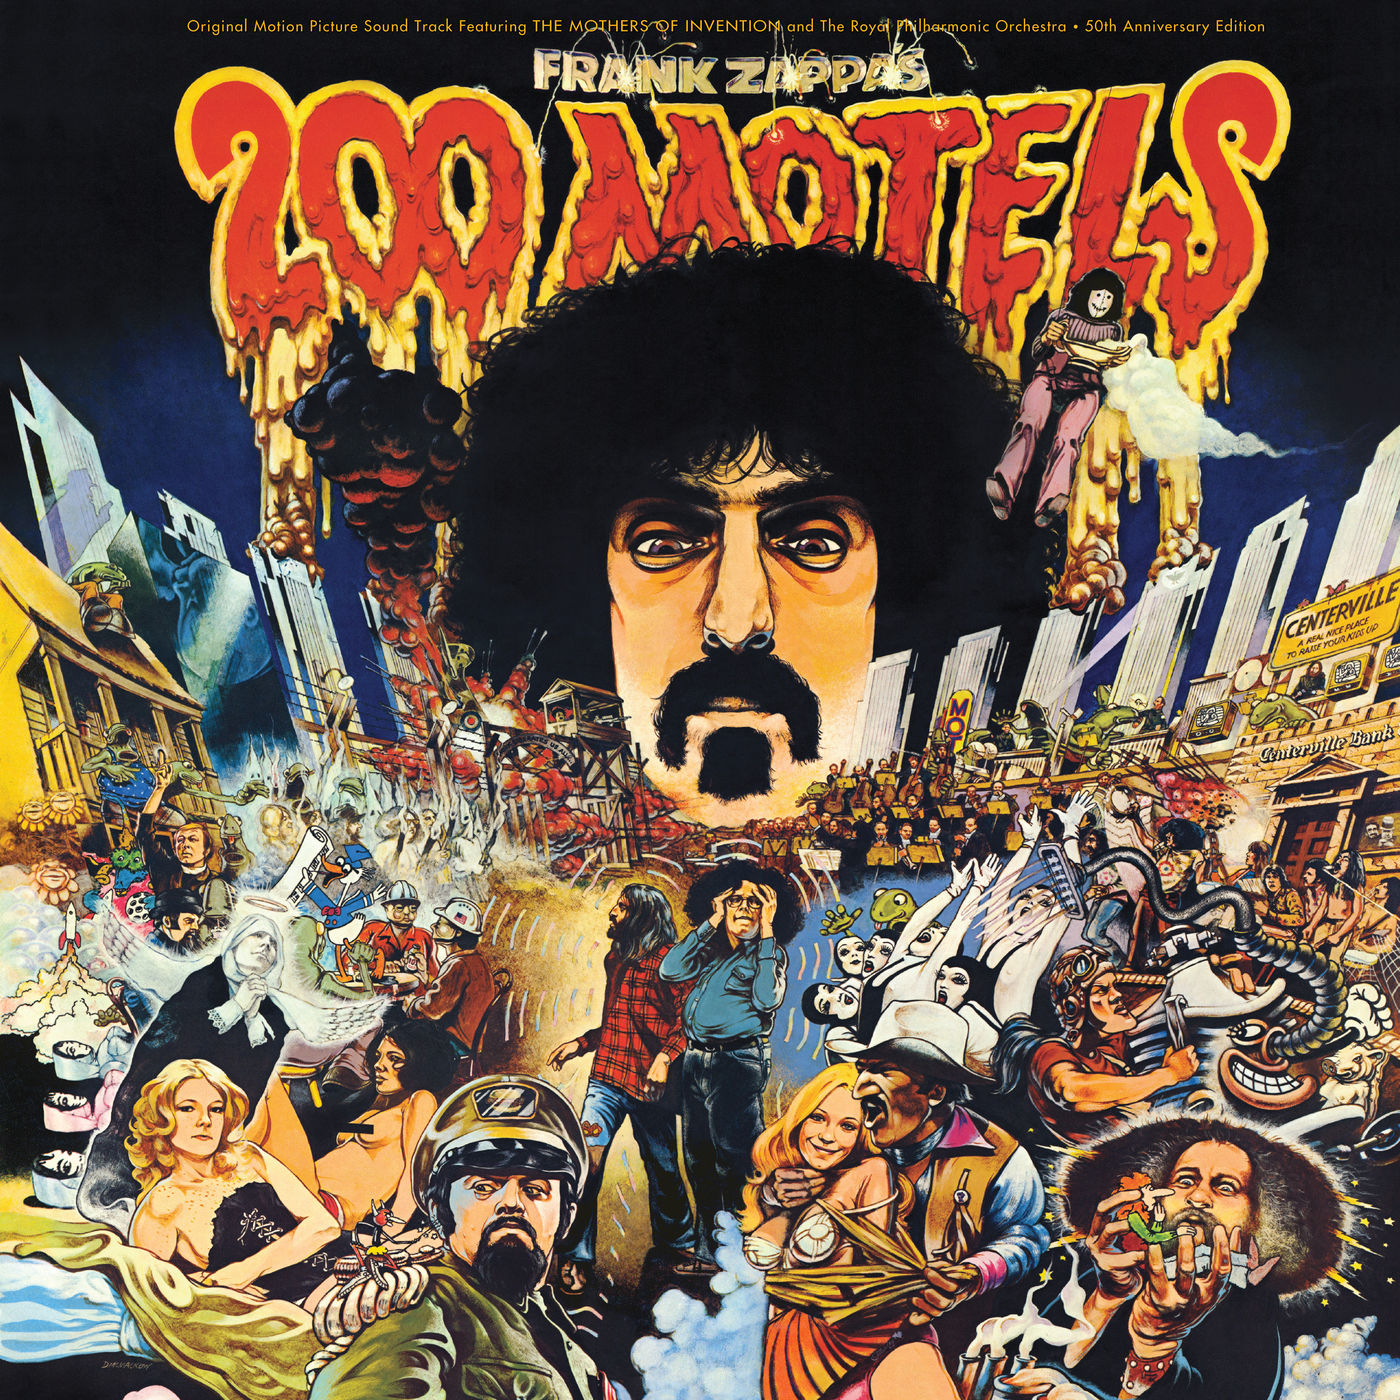 Frank Zappa - The Mothers Of Invention - 1971 - 200 Motels 50th Anniv Ed [2021] CD1 24-96